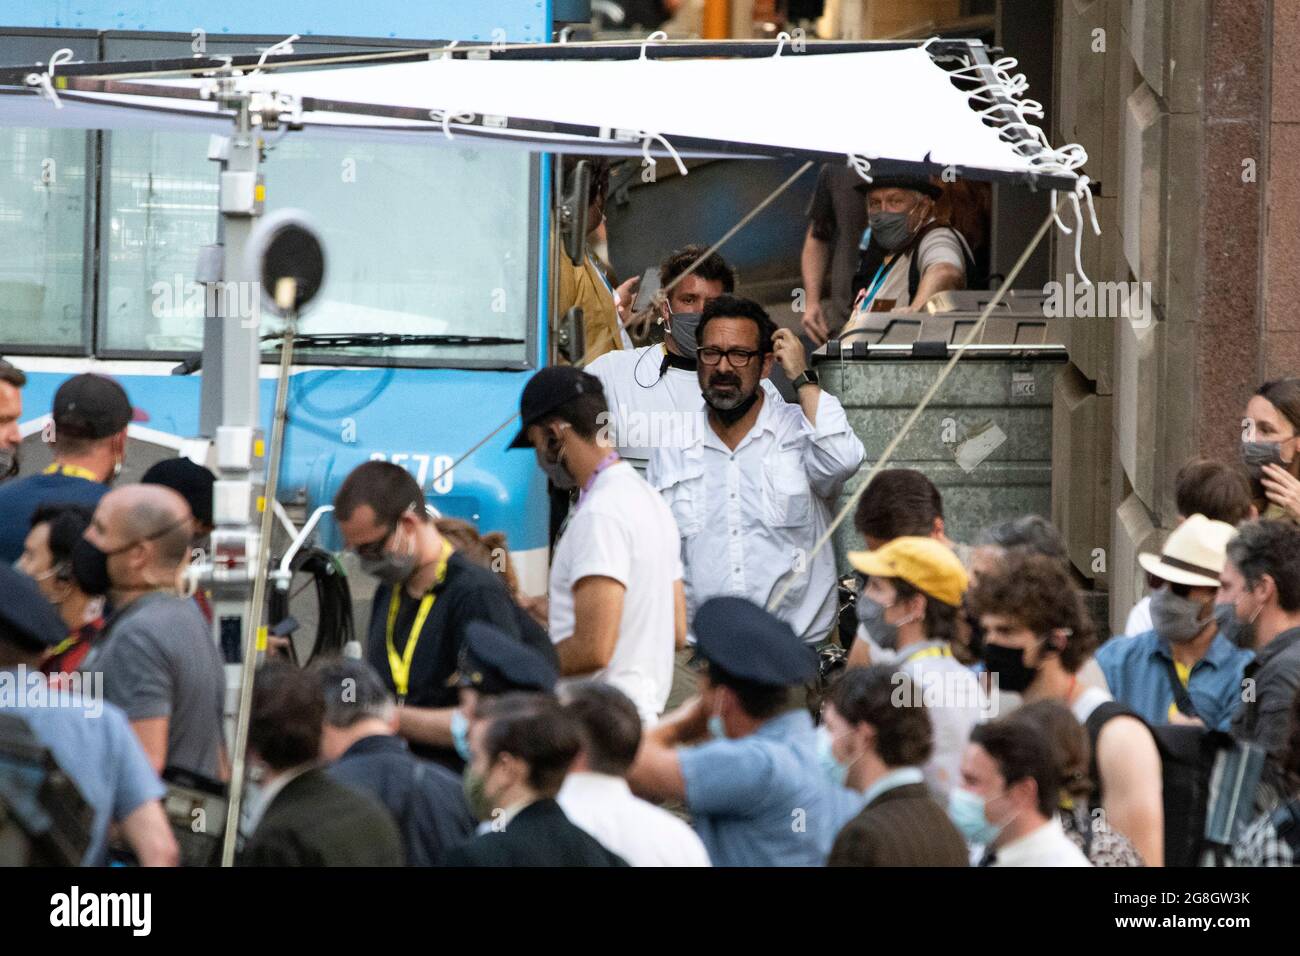 Glasgow, Scotland, UK. 20th July, 2021. PICTURED: The films producer and director, James Mangold seen in white and dark glasses seen in between takes on set. Filming on the set of Indiana Jones 5 in the middle of Glasgow city centre as the Hollywood blockbuster sets up Glasgow as New York City. A full production can be seen, with a large cast, producers and extras. The city centre has been changed so that all the shop fronts and building look like 1959 America. Credit: Colin Fisher/Alamy Live News Stock Photo